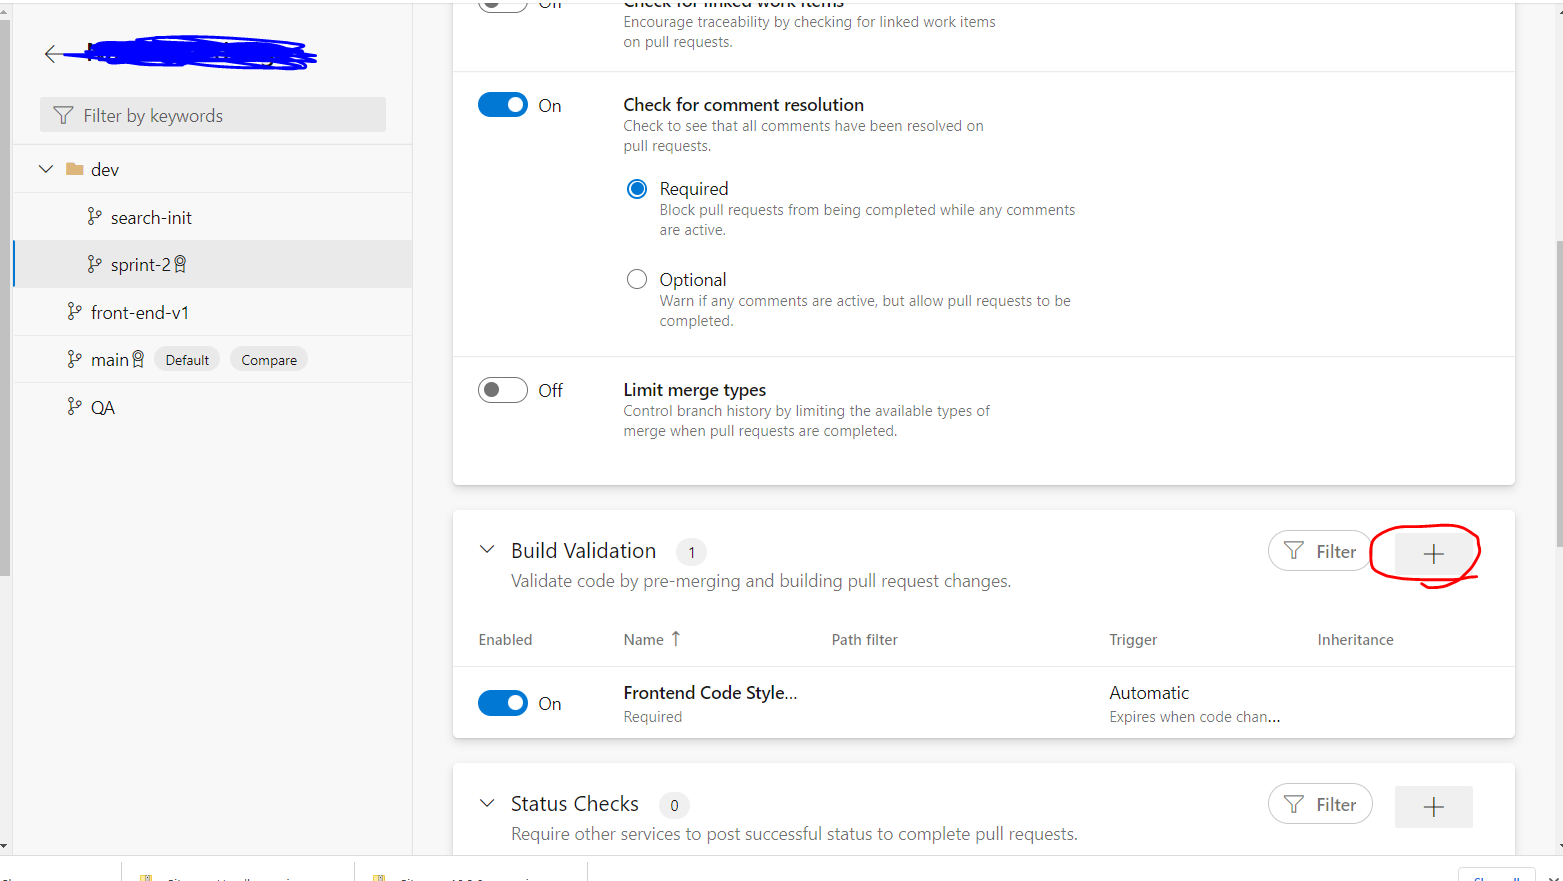 Scroll down to 'Build Validation' and click on the + sign in Azure DevOps.